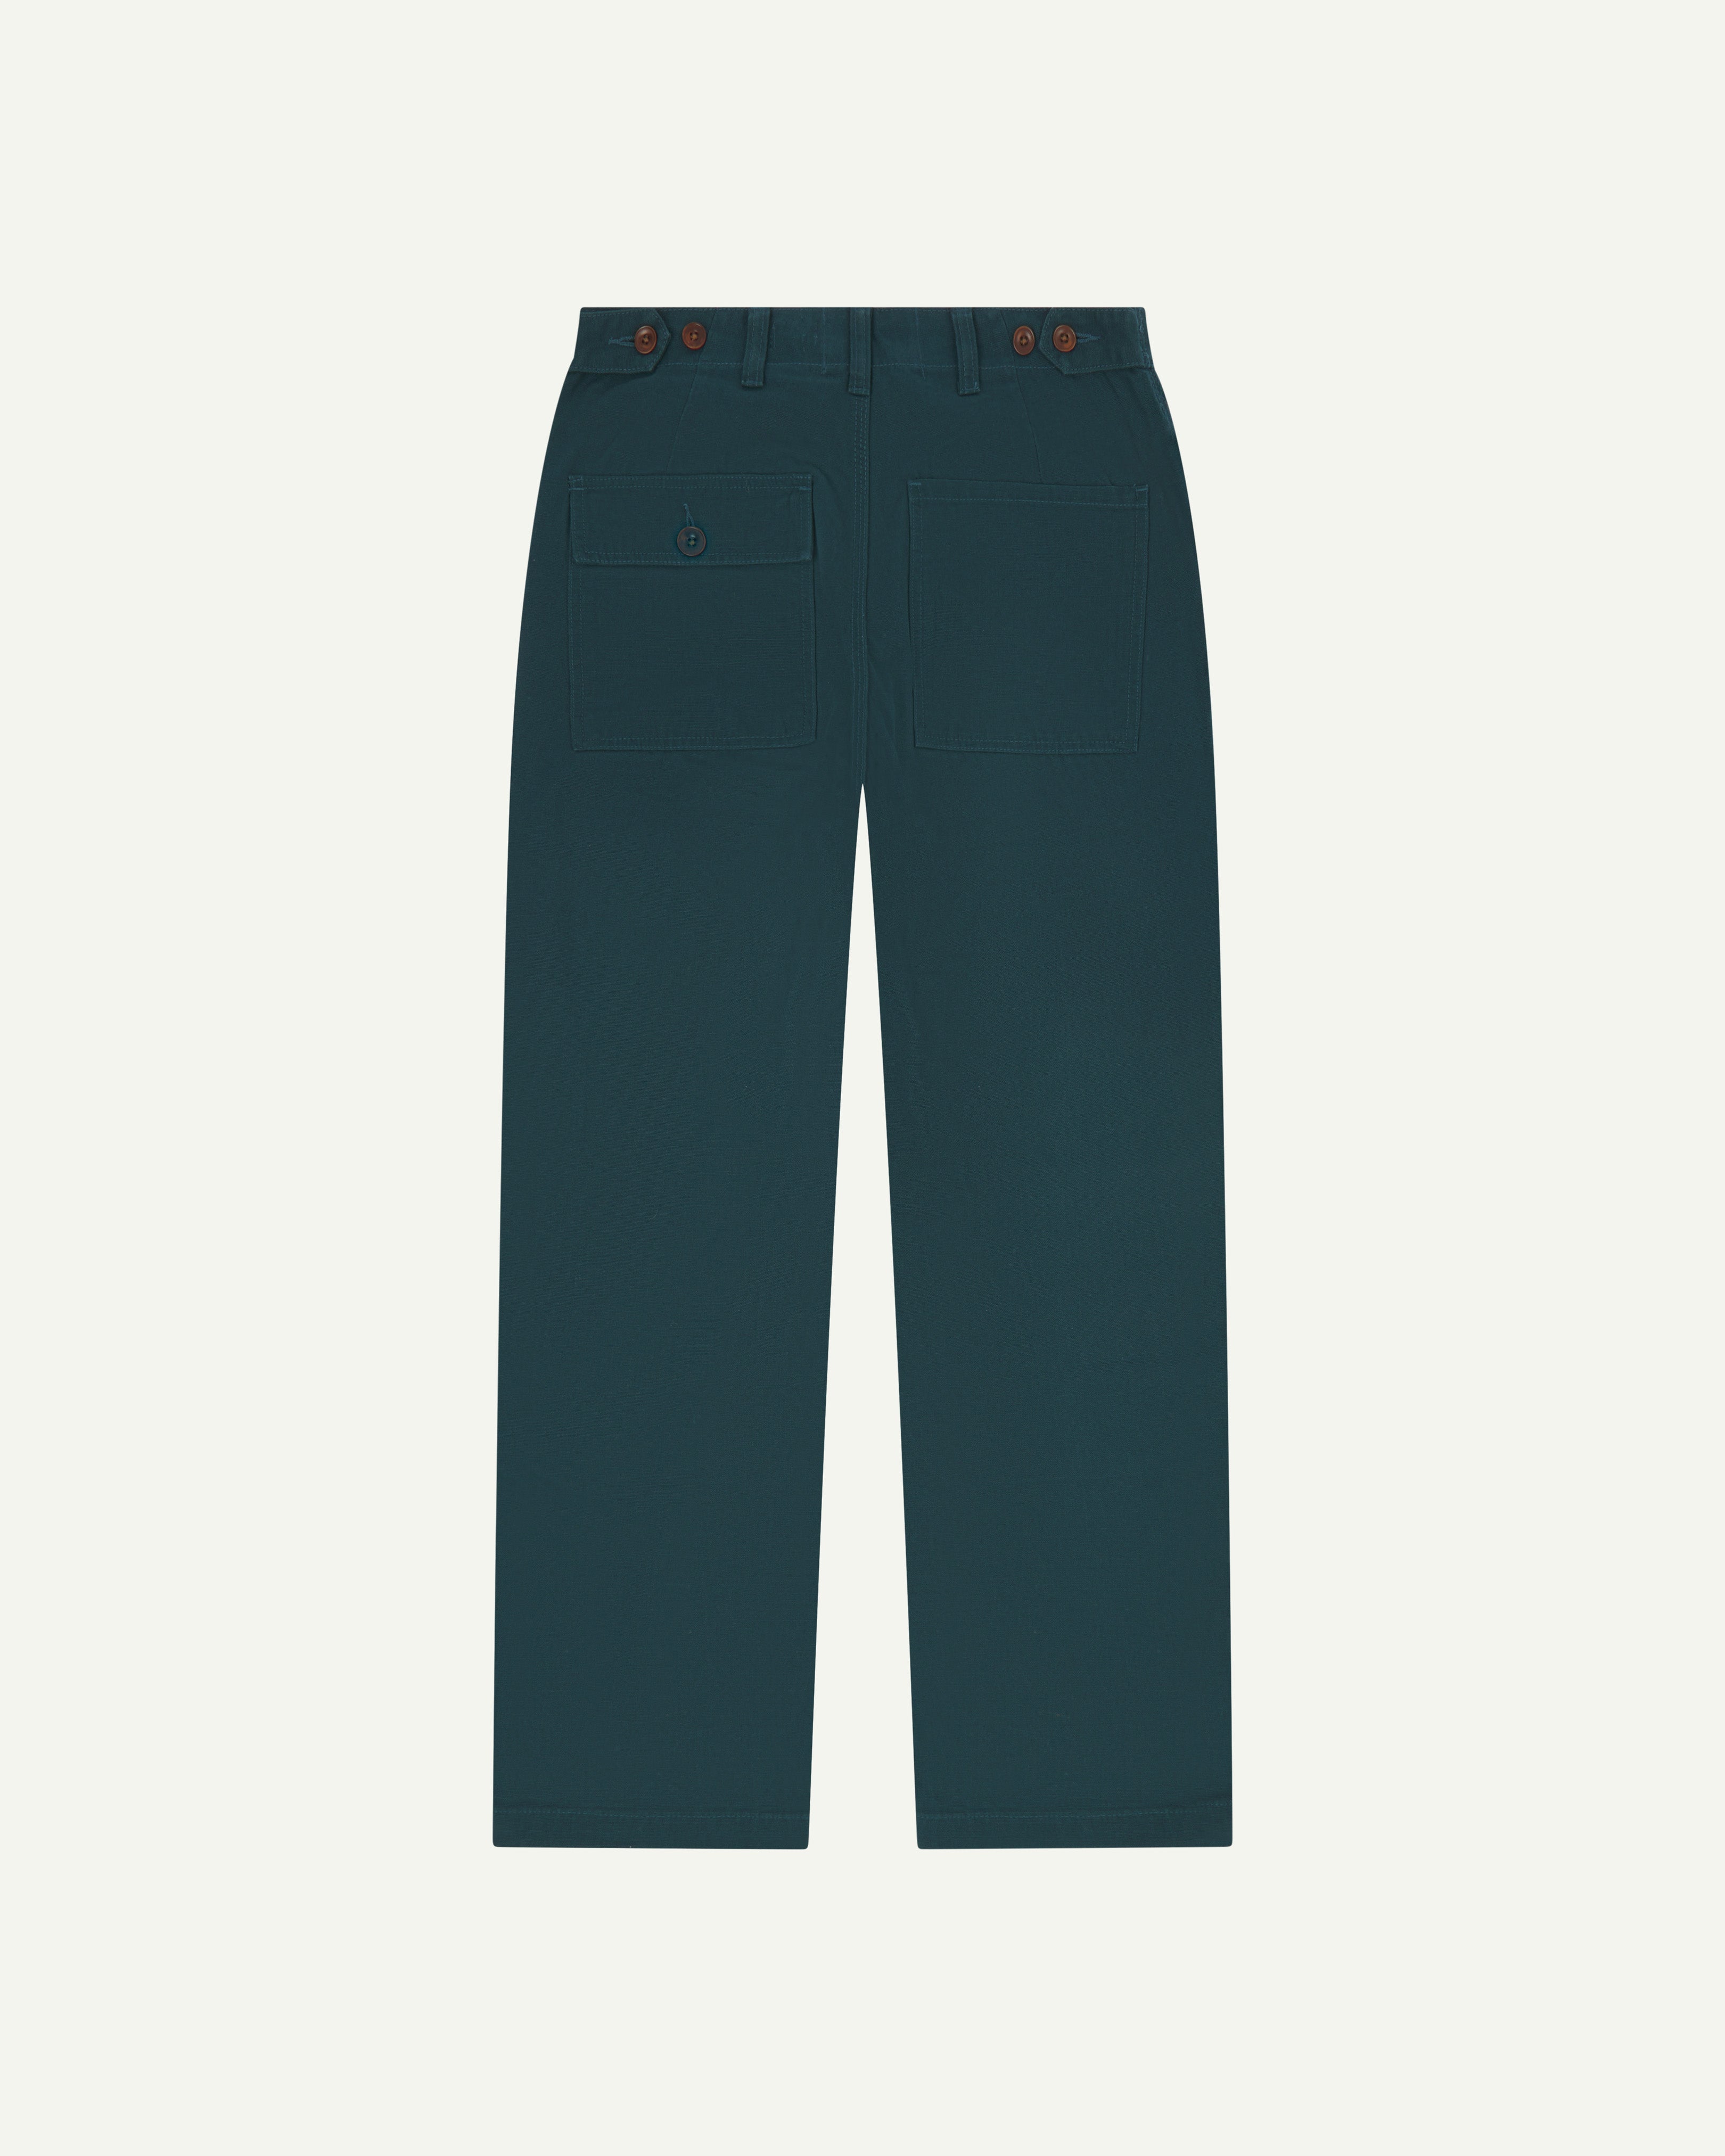 Flat view of back of #5005 Uskees men's organic cotton 'peacock' coloured trousers on white background.